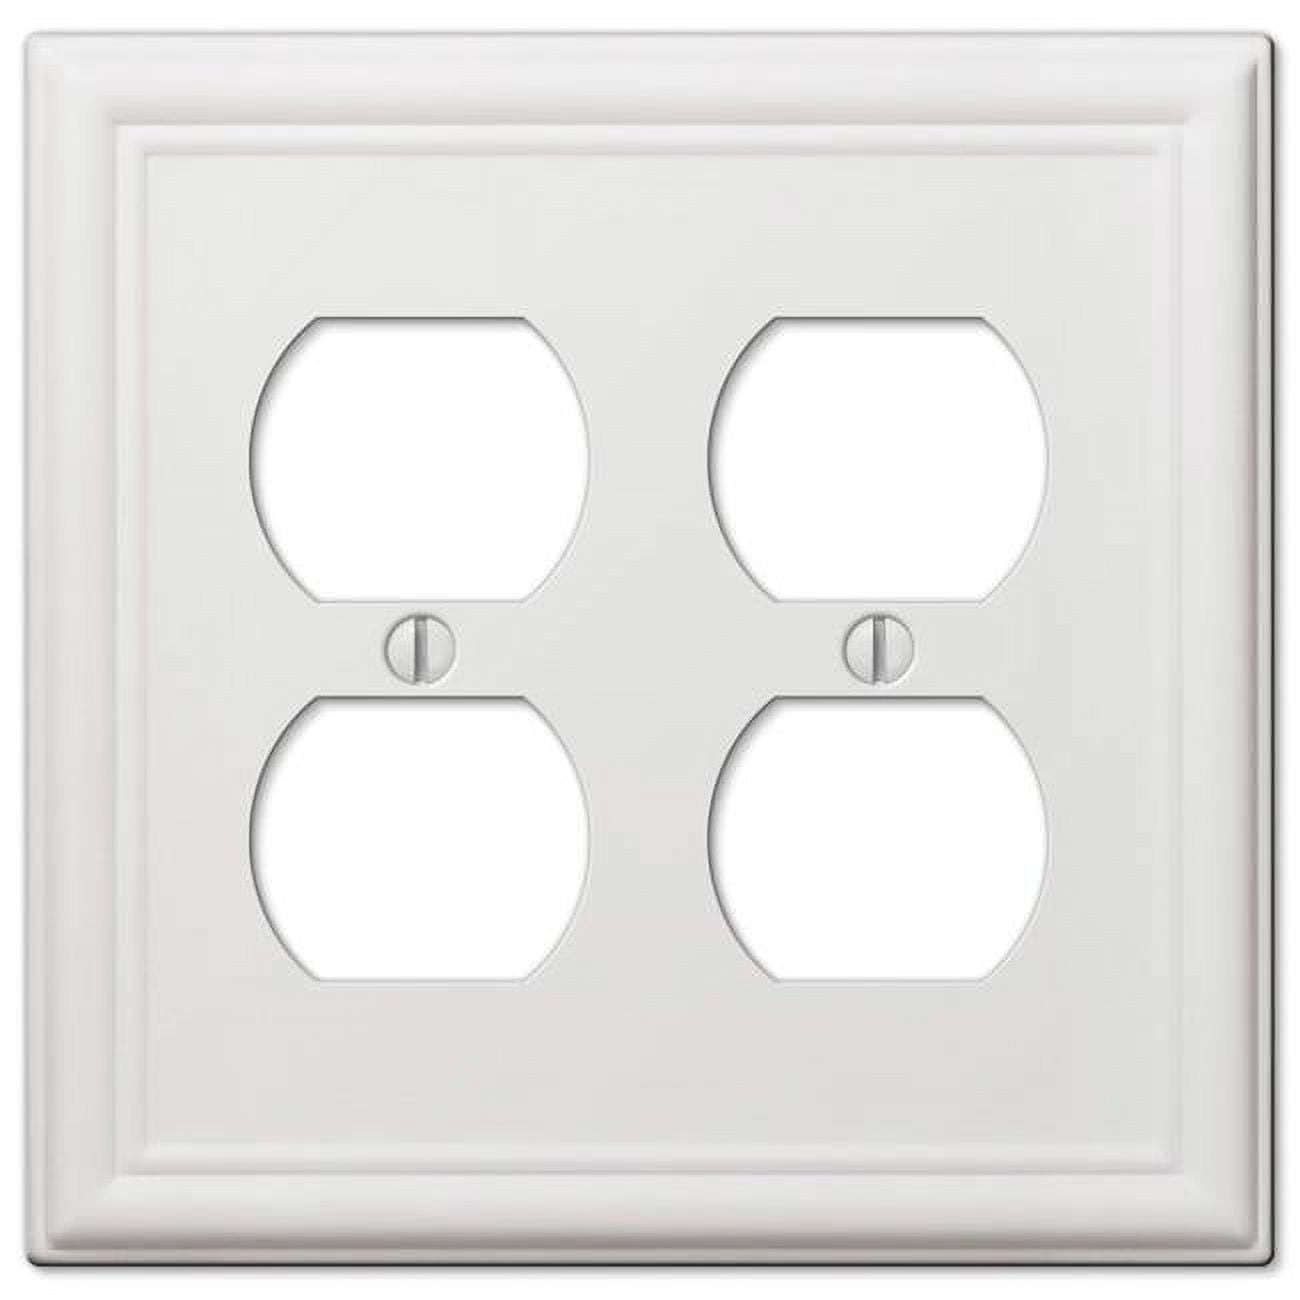 Picture of Amerelle 3009125 Chelsea 2 Gang Stamped Steel Duplex Outlet Wall Plate, White